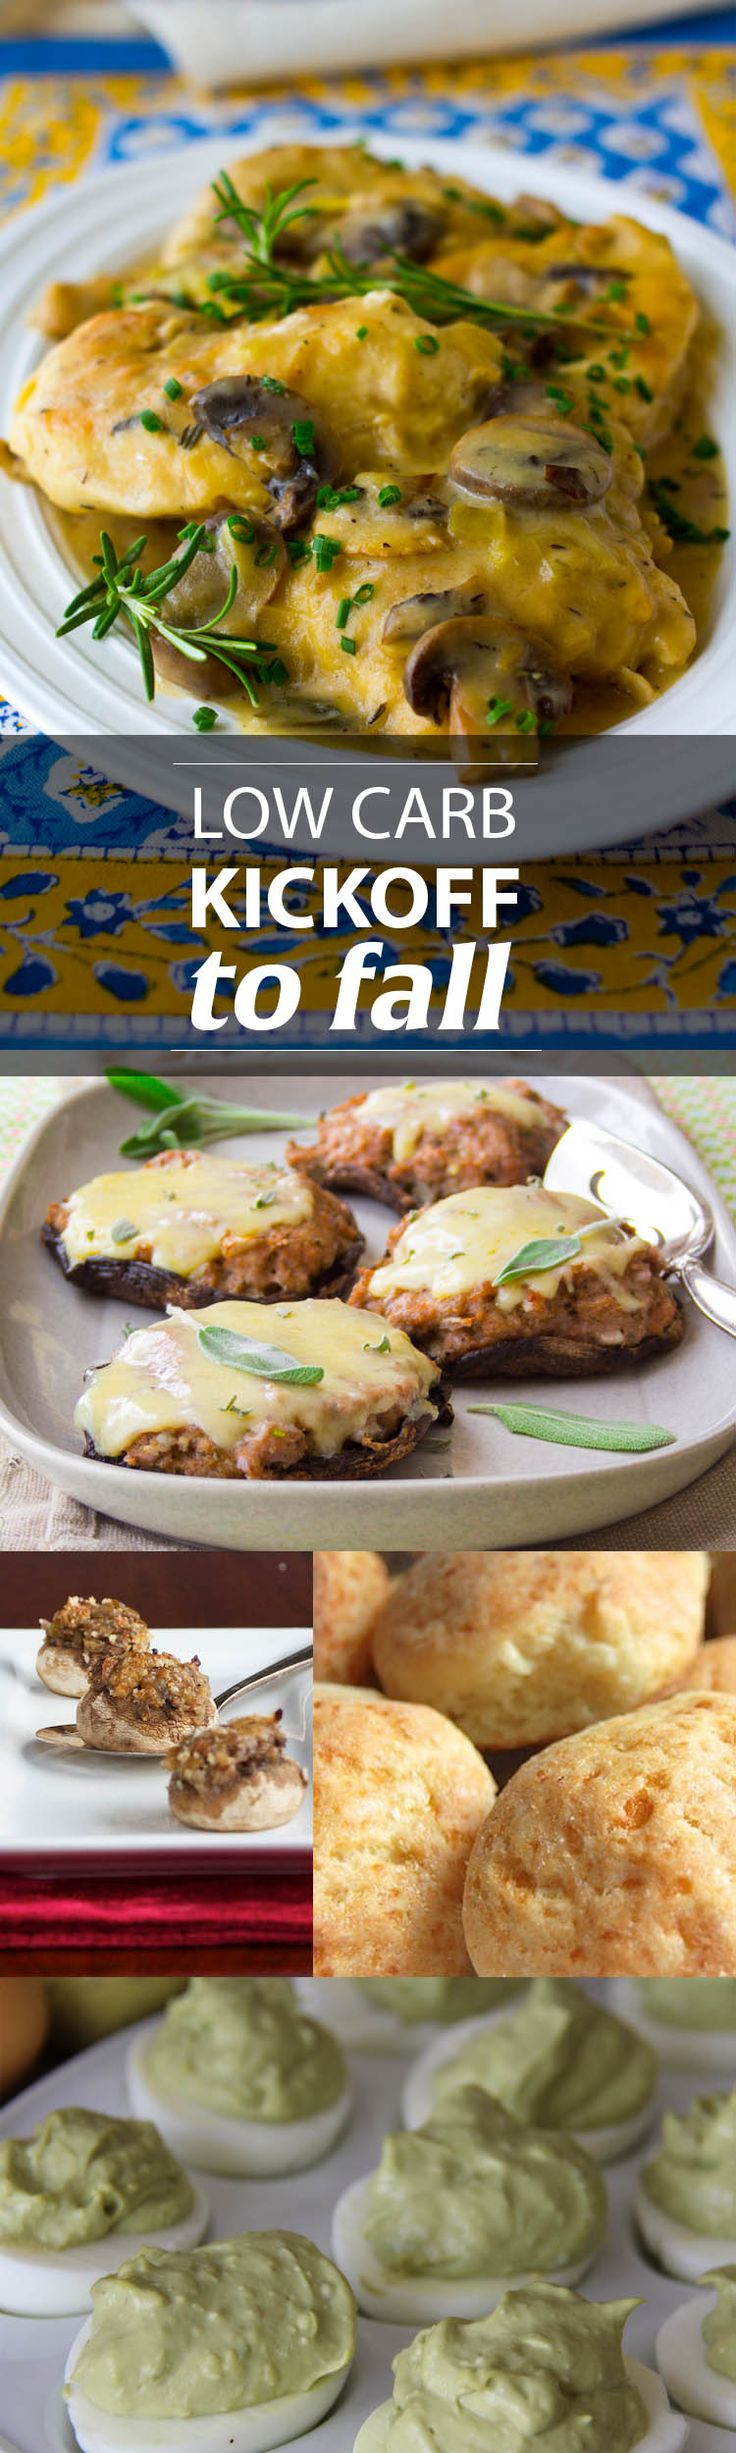 Low Carb Fall Recipes
 17 Best images about No carb meal ideas on Pinterest